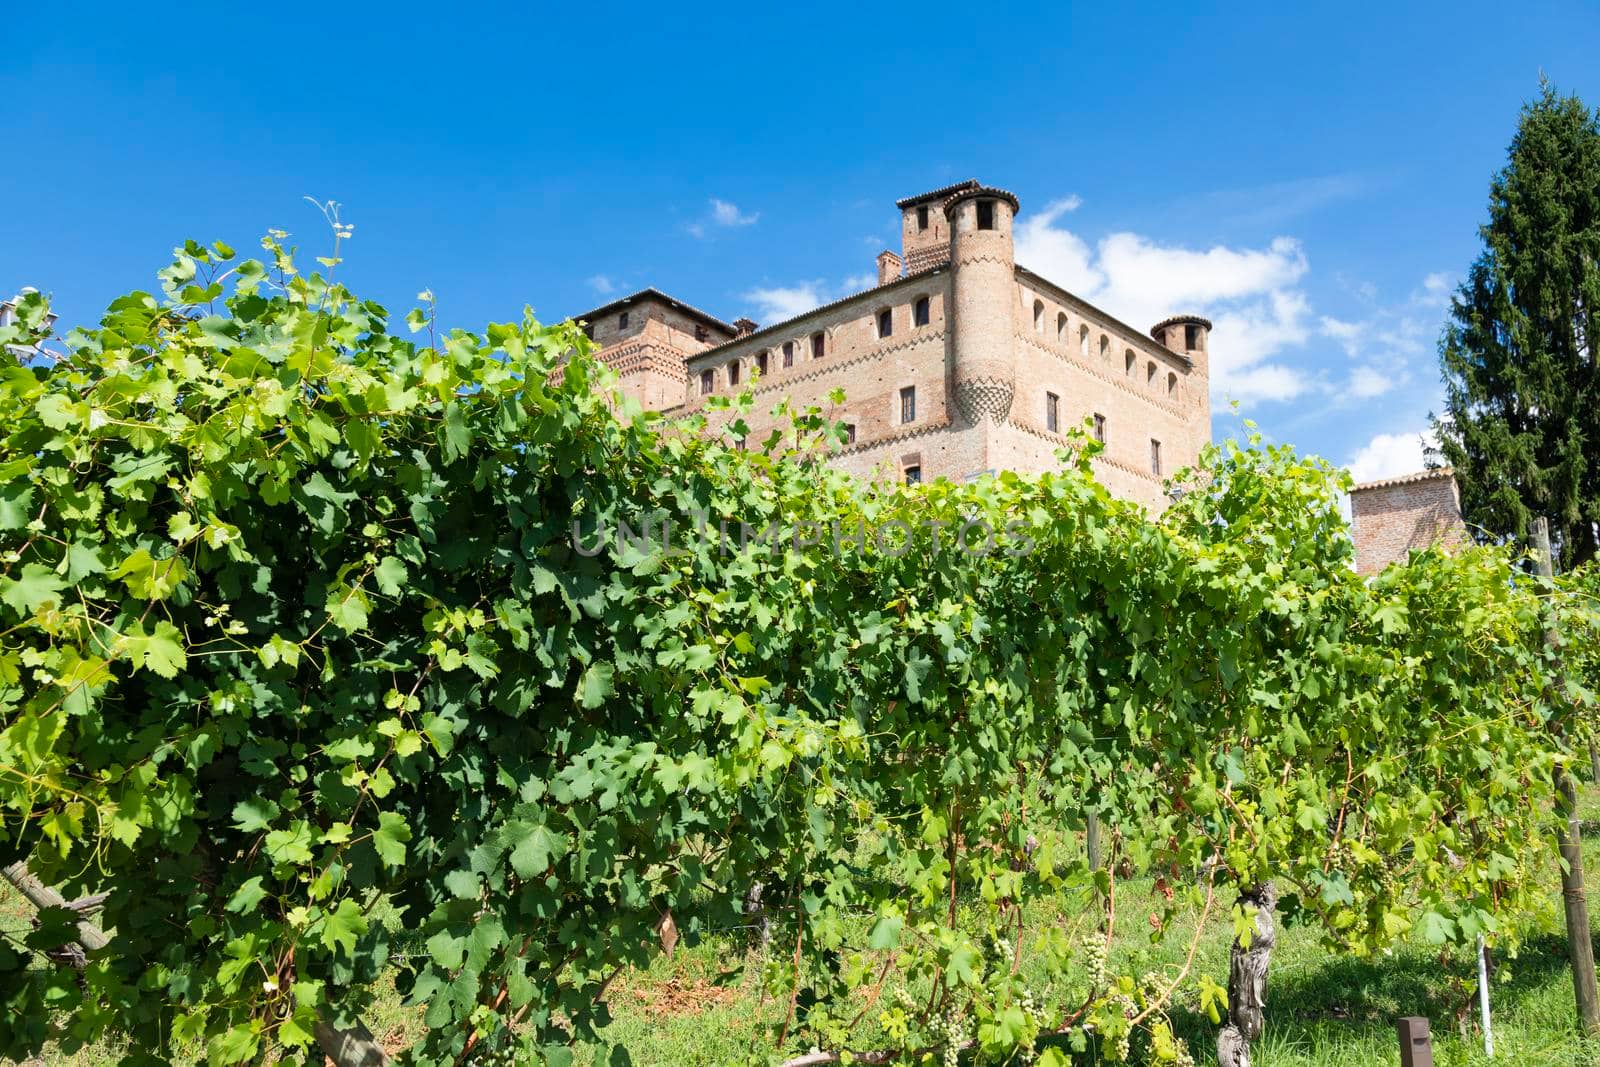 Vineyard in Piedmont Region, Italy, with Grinzane Cavour castle in the background. The Langhe is the wine district of Barolo wine.